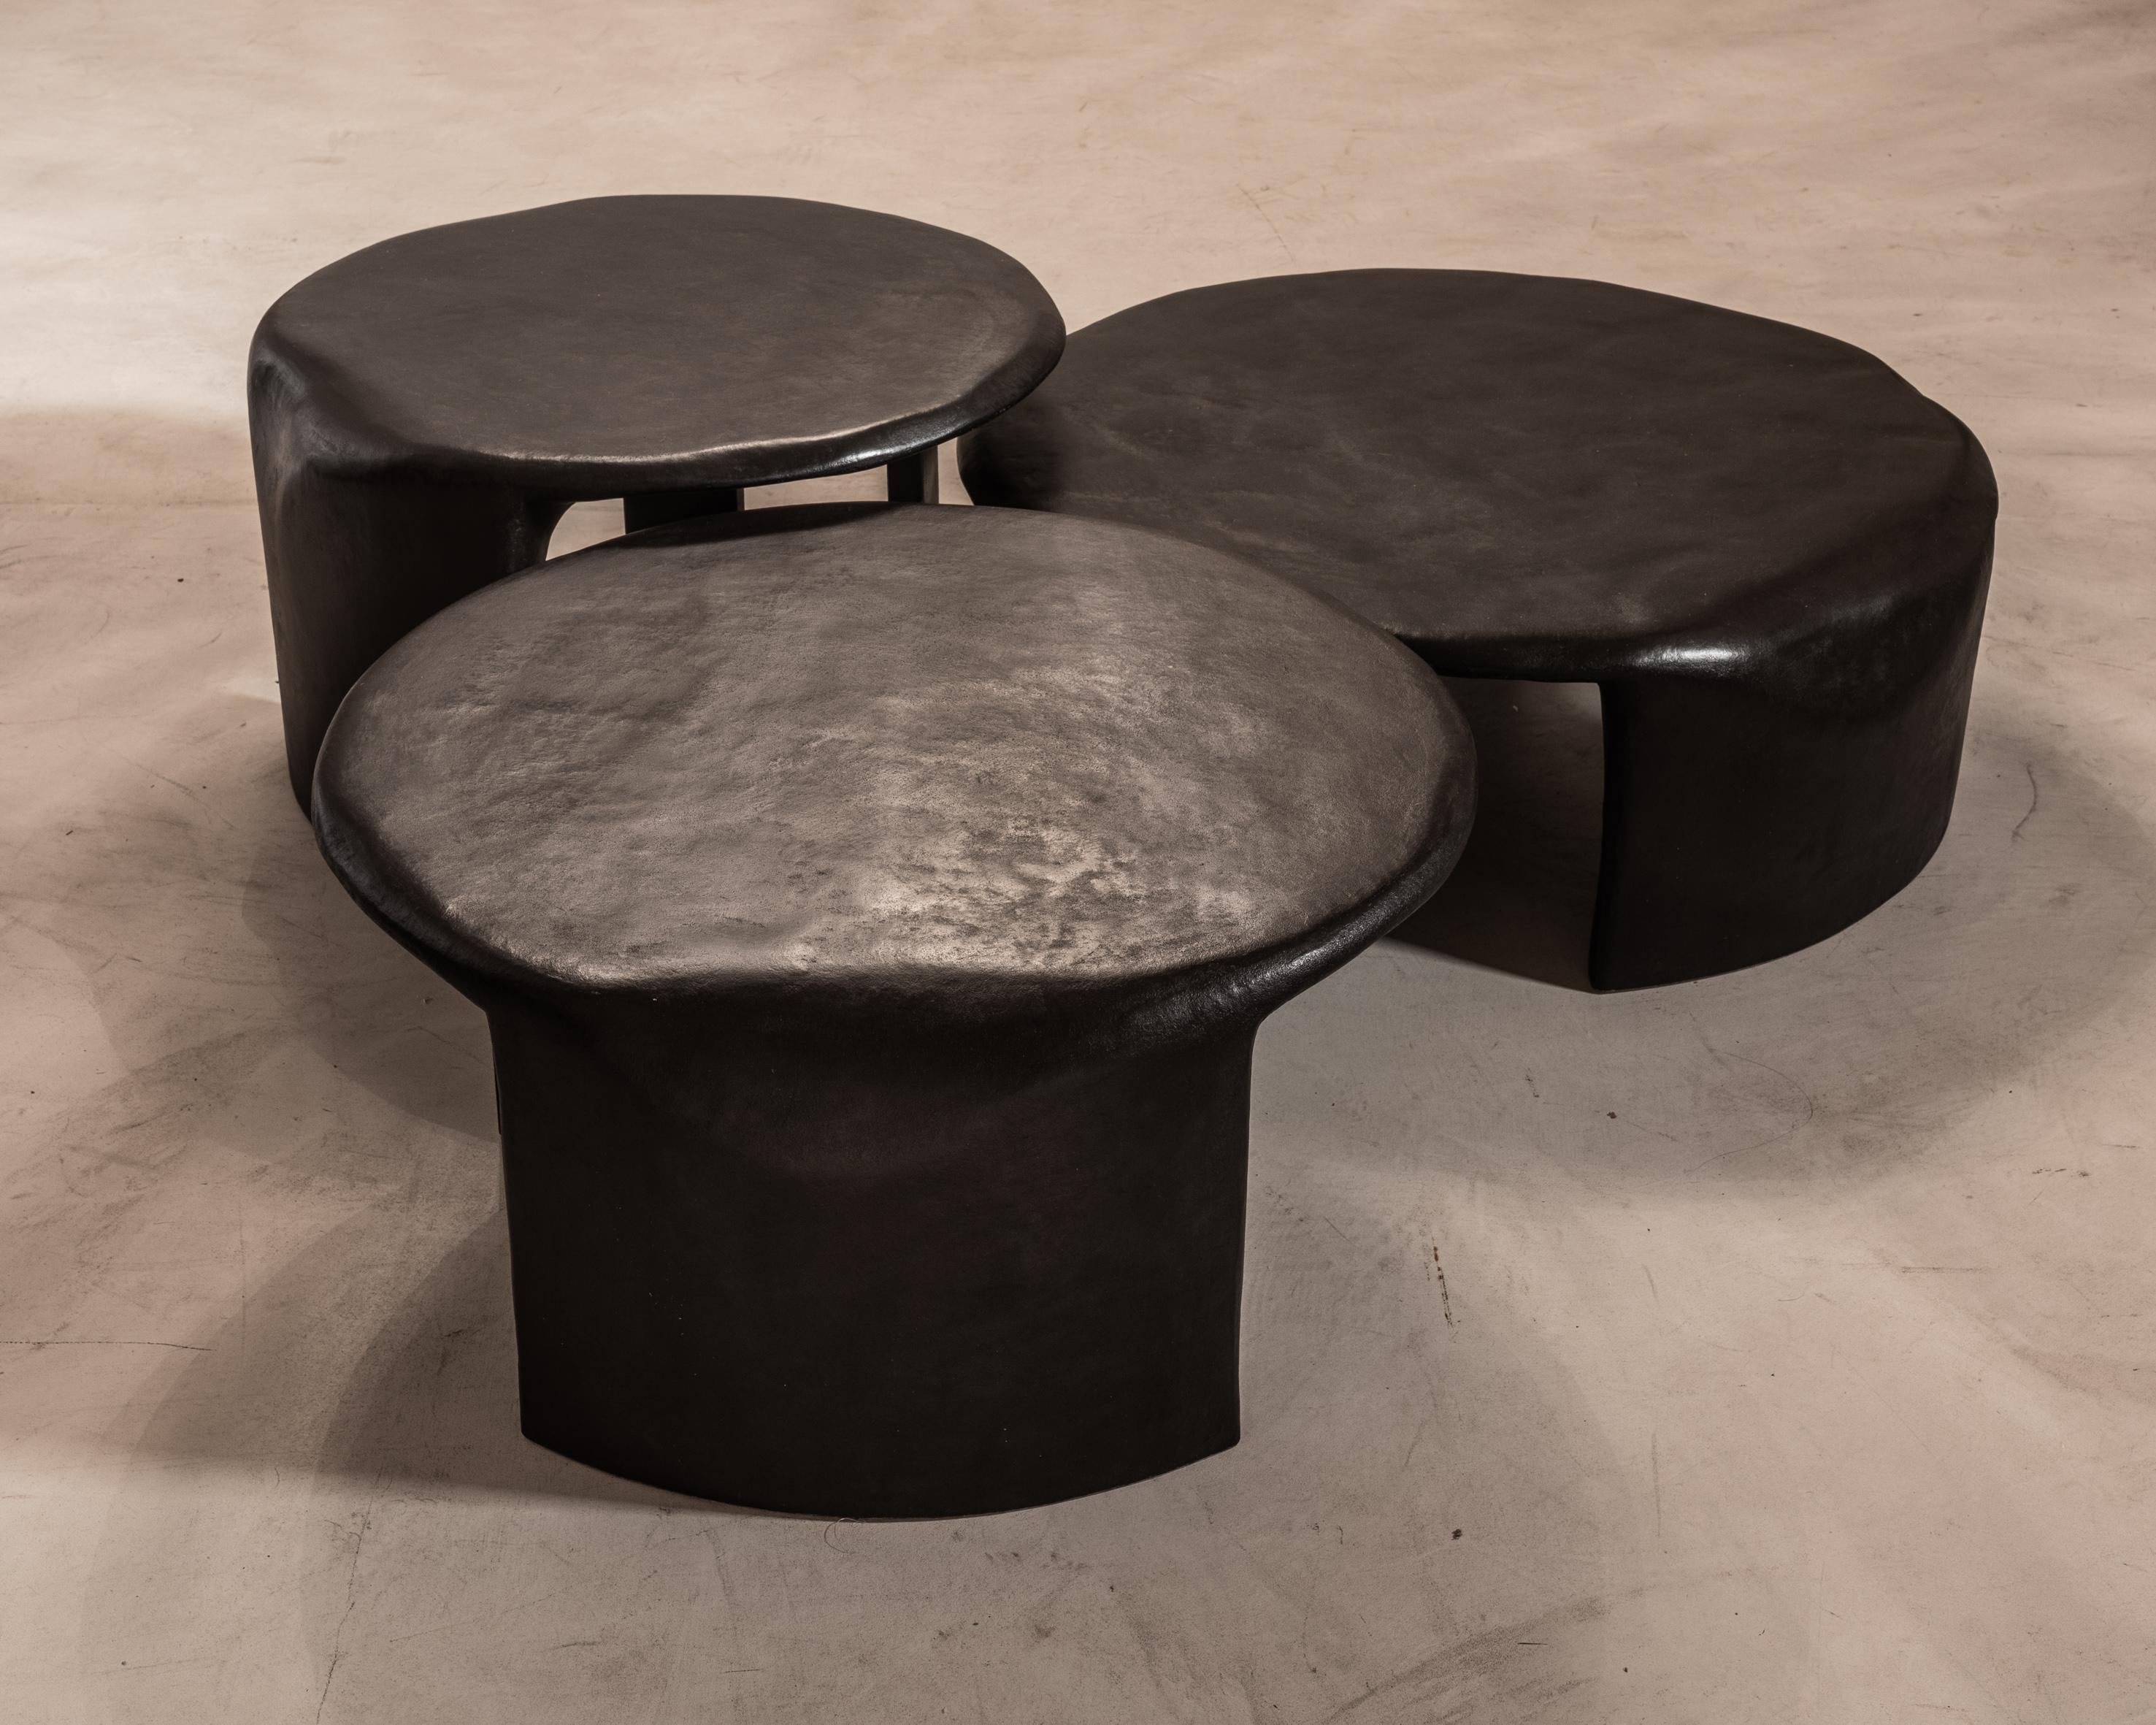 Bellagio coffee table set by Studio Emblématique
Dimensions: 
D 70 cm x H 42 cm
D 80 cm x H 33 cm
D 90 cm/ D 110 x H 31 cm
Materials: Stonegrain table top with conical metal hammered legs

Pushing the boundaries, going the extra mile to find